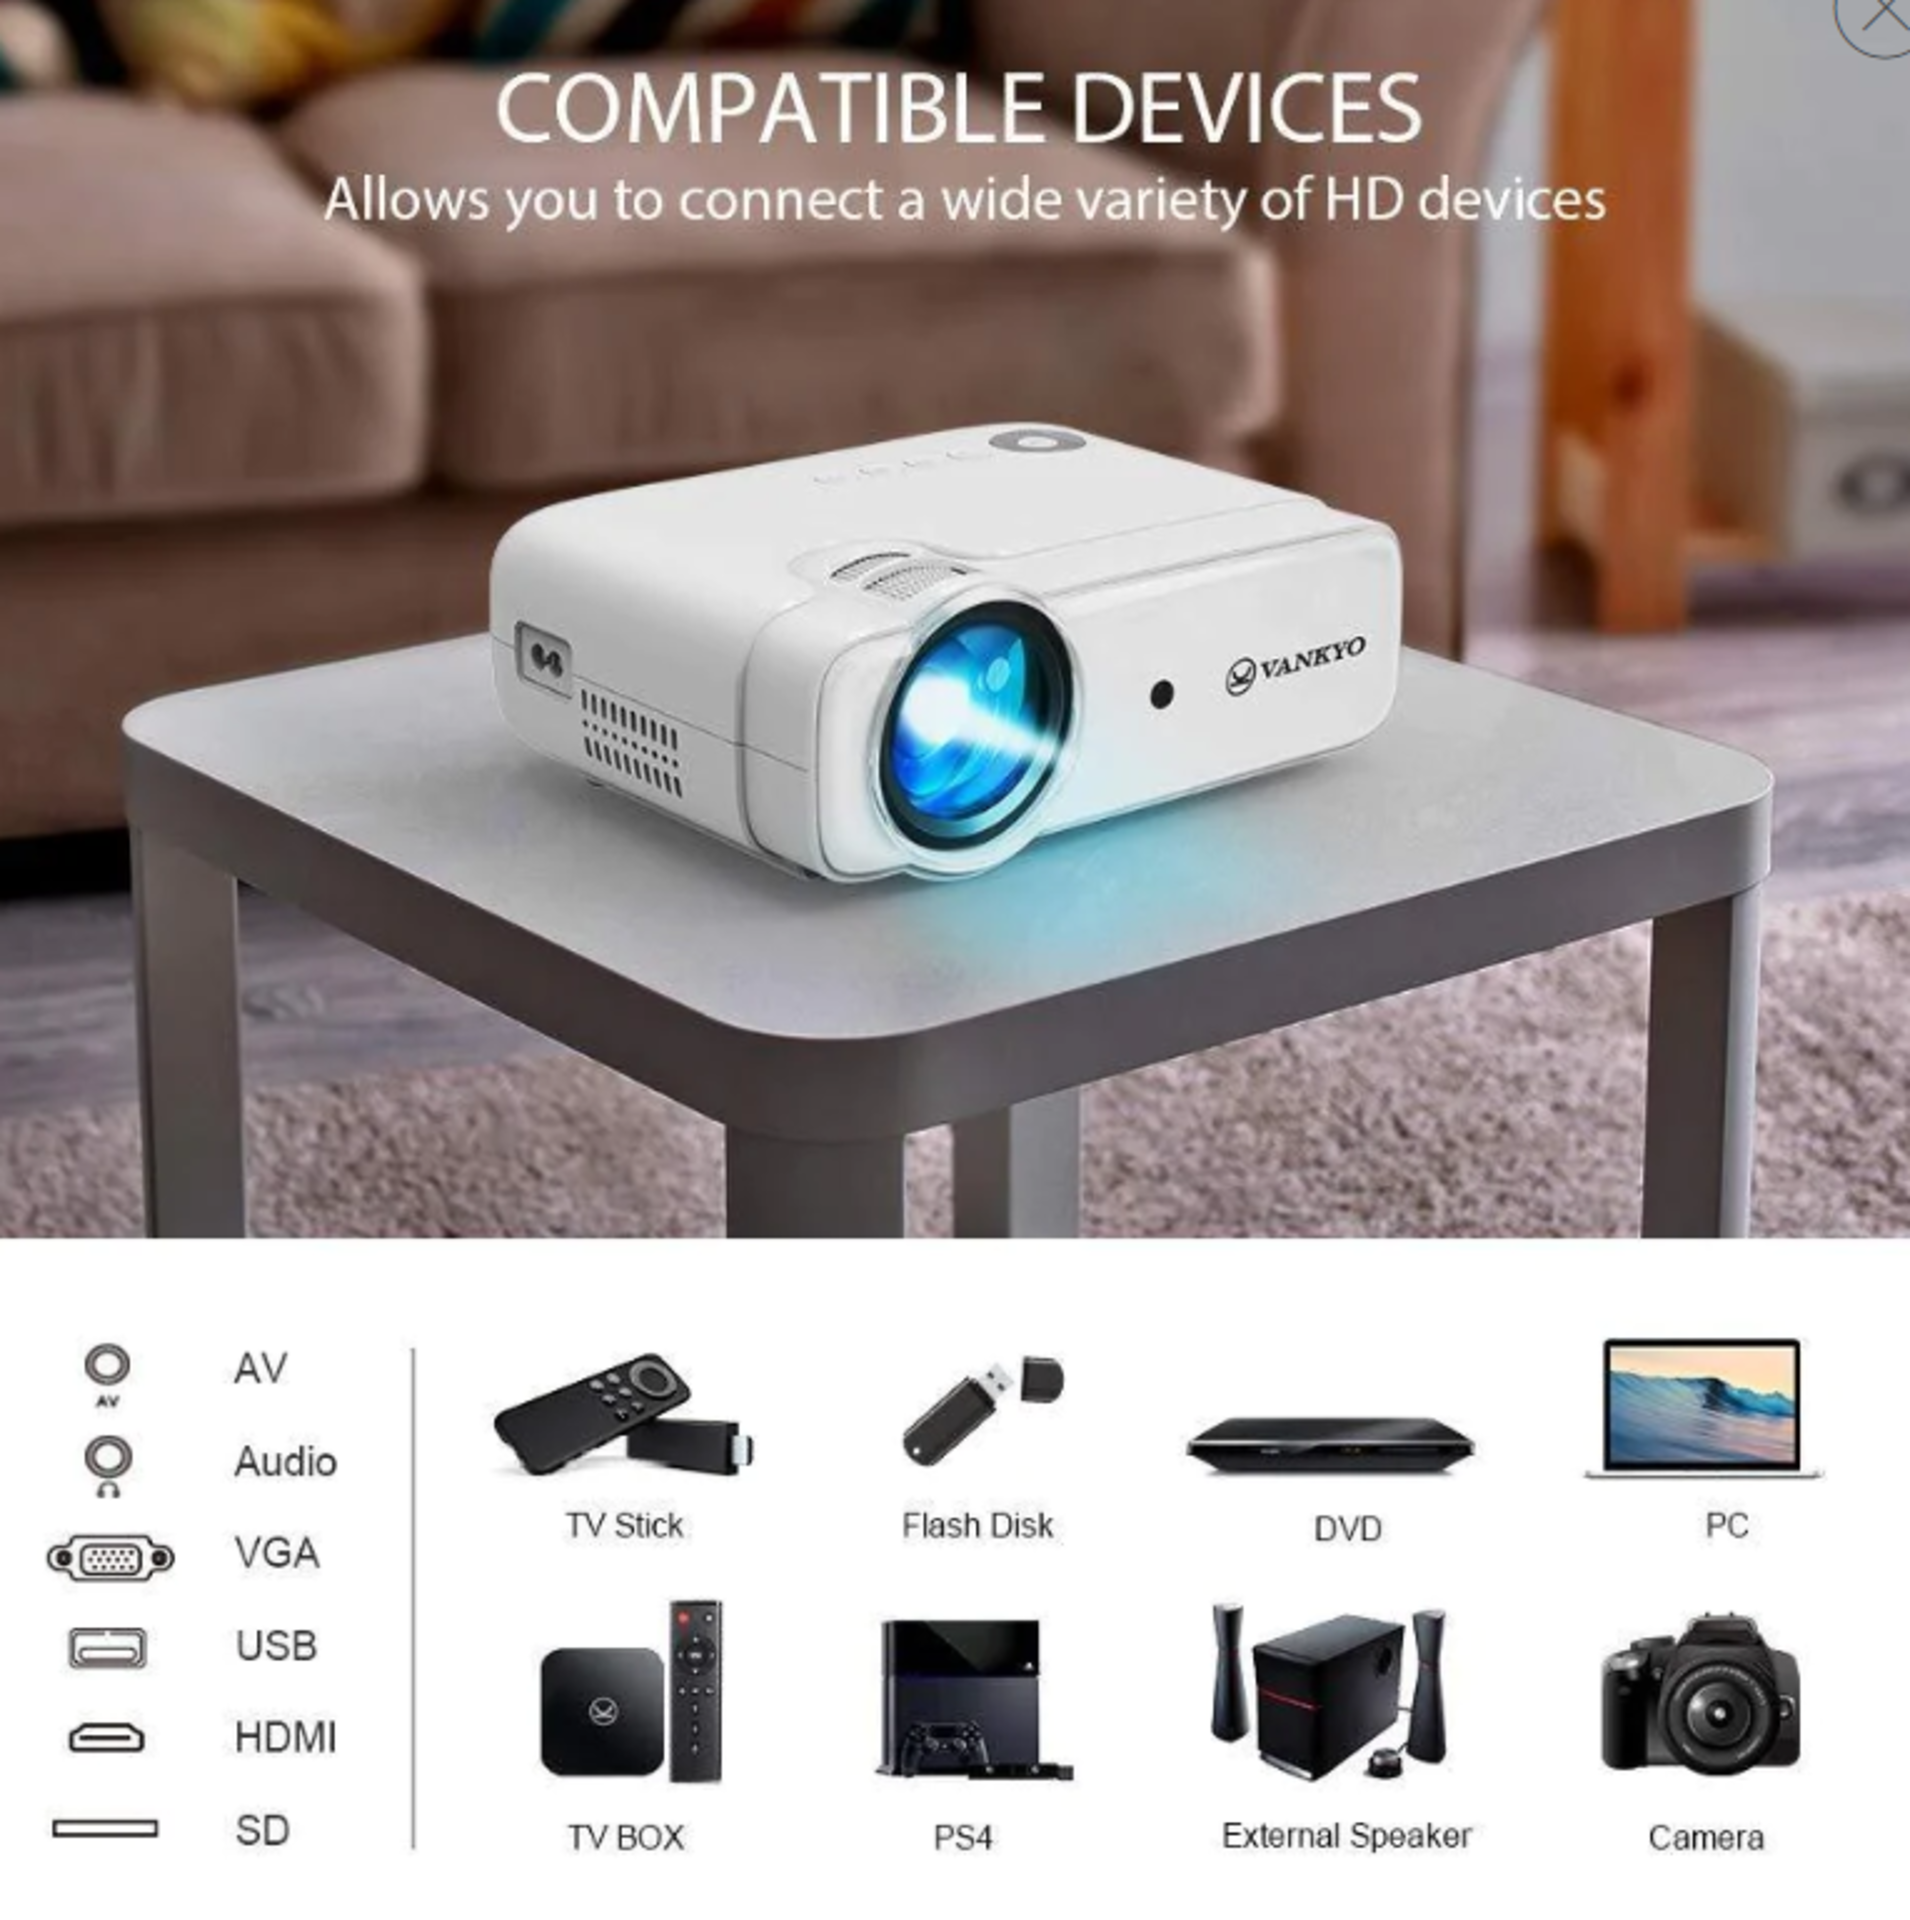 5 x New Boxed VANKYO Leisure 430 Mini Projector for Movie, Outdoor Entertainment, Native 720P. - Image 3 of 3